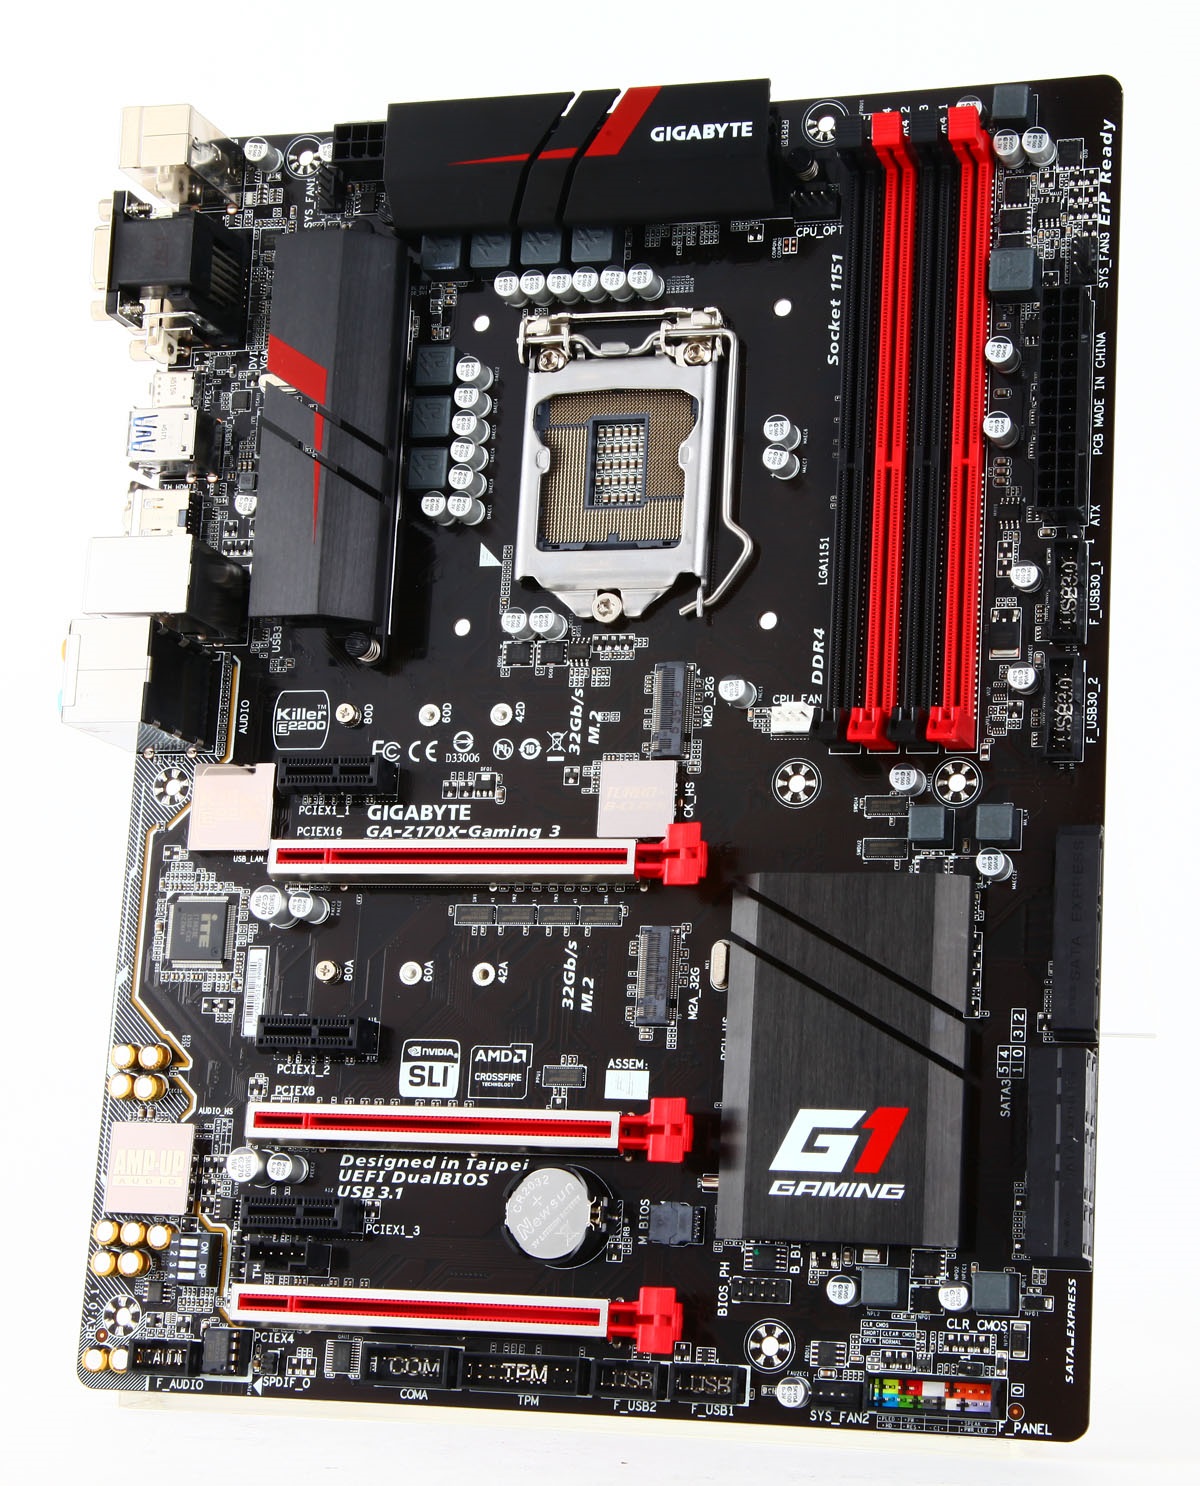 Media asset (photo, screenshot, or image in full size) related to contents posted at 3dfxzone.it | Image Name: Gigabyte-GA-Z170X-Gaming-3_1.jpg